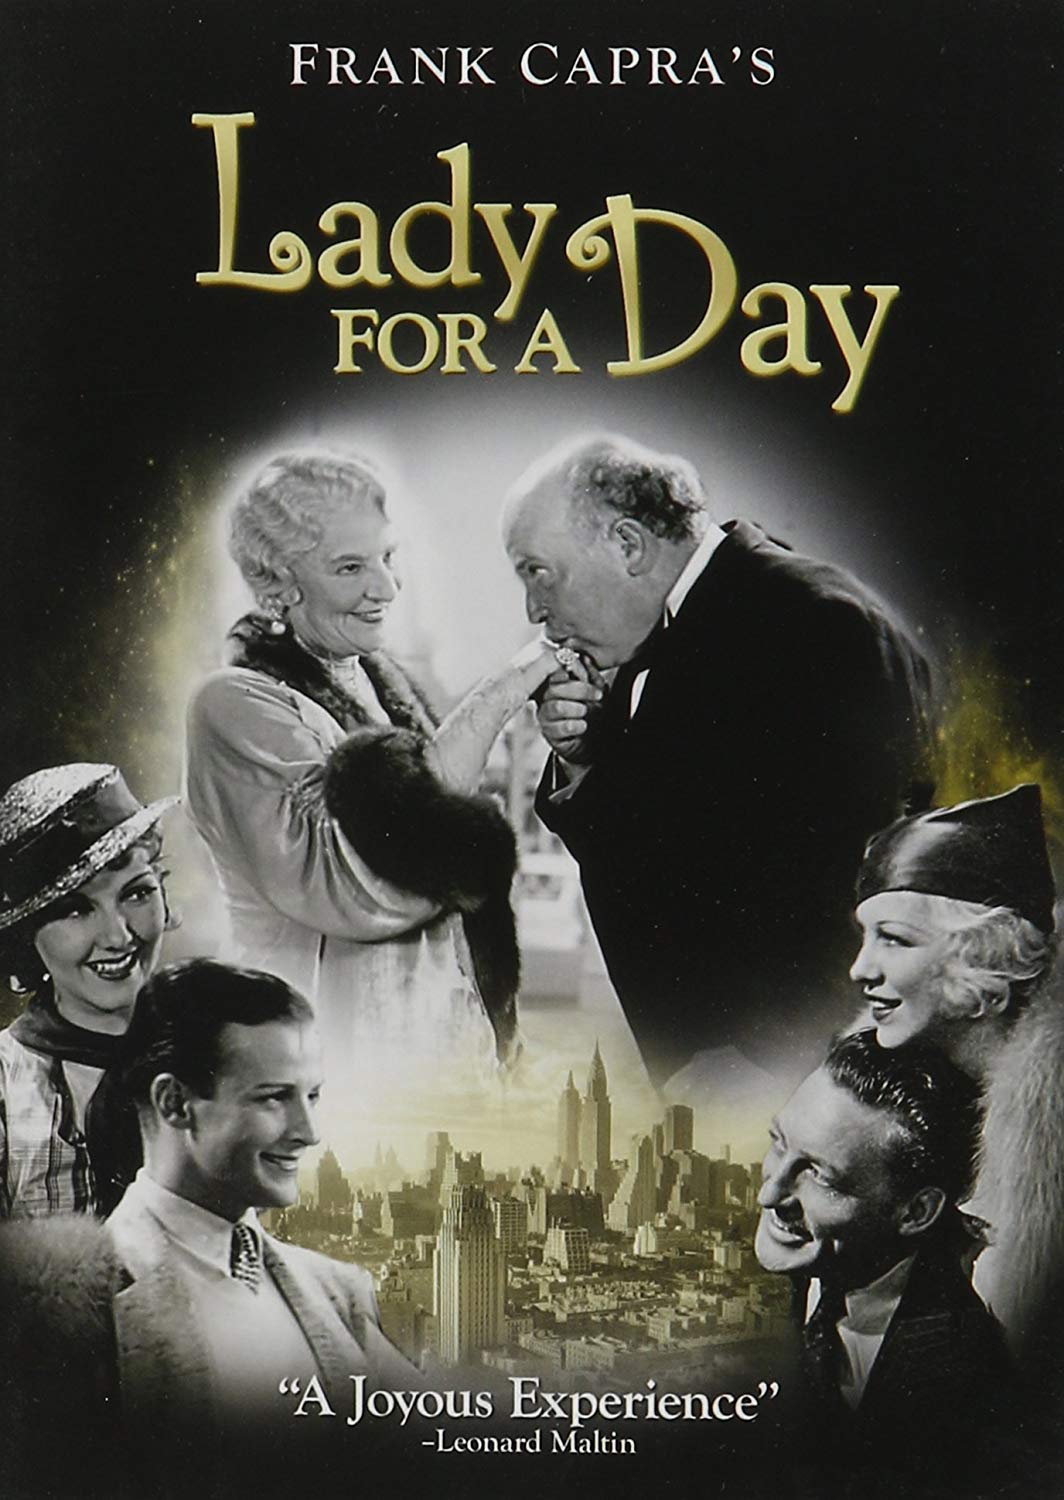 Lady for a Day (1933) starring Warren William, May Robson, Guy Kibbee, Glenda Farrell, Ned Sparks, directed by Frank Capra